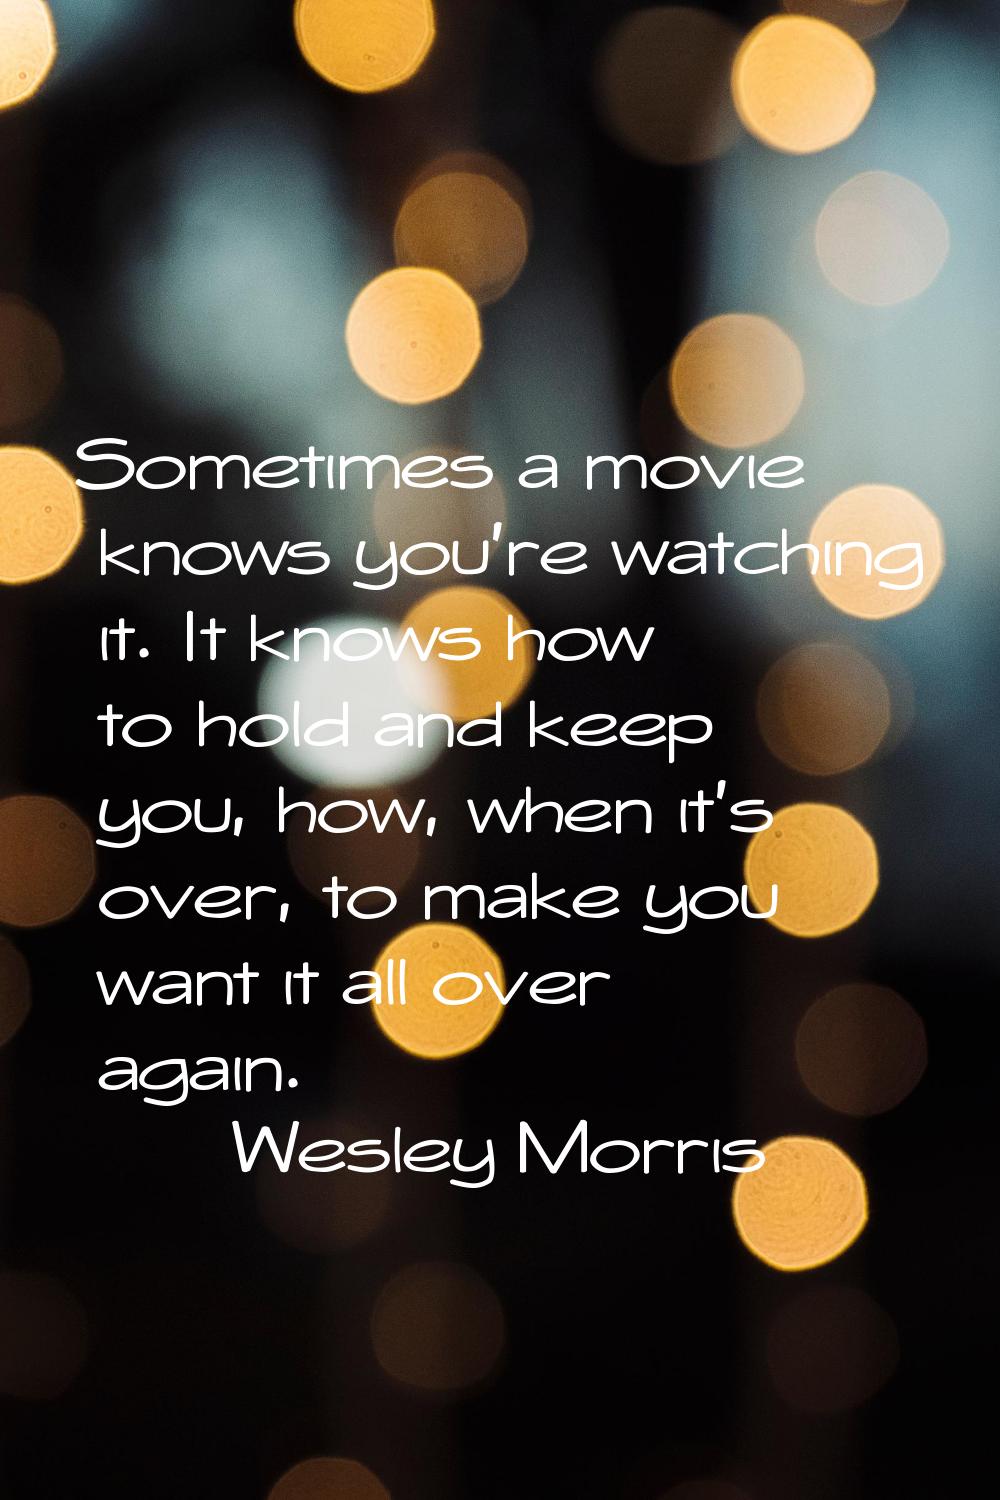 Sometimes a movie knows you're watching it. It knows how to hold and keep you, how, when it's over,